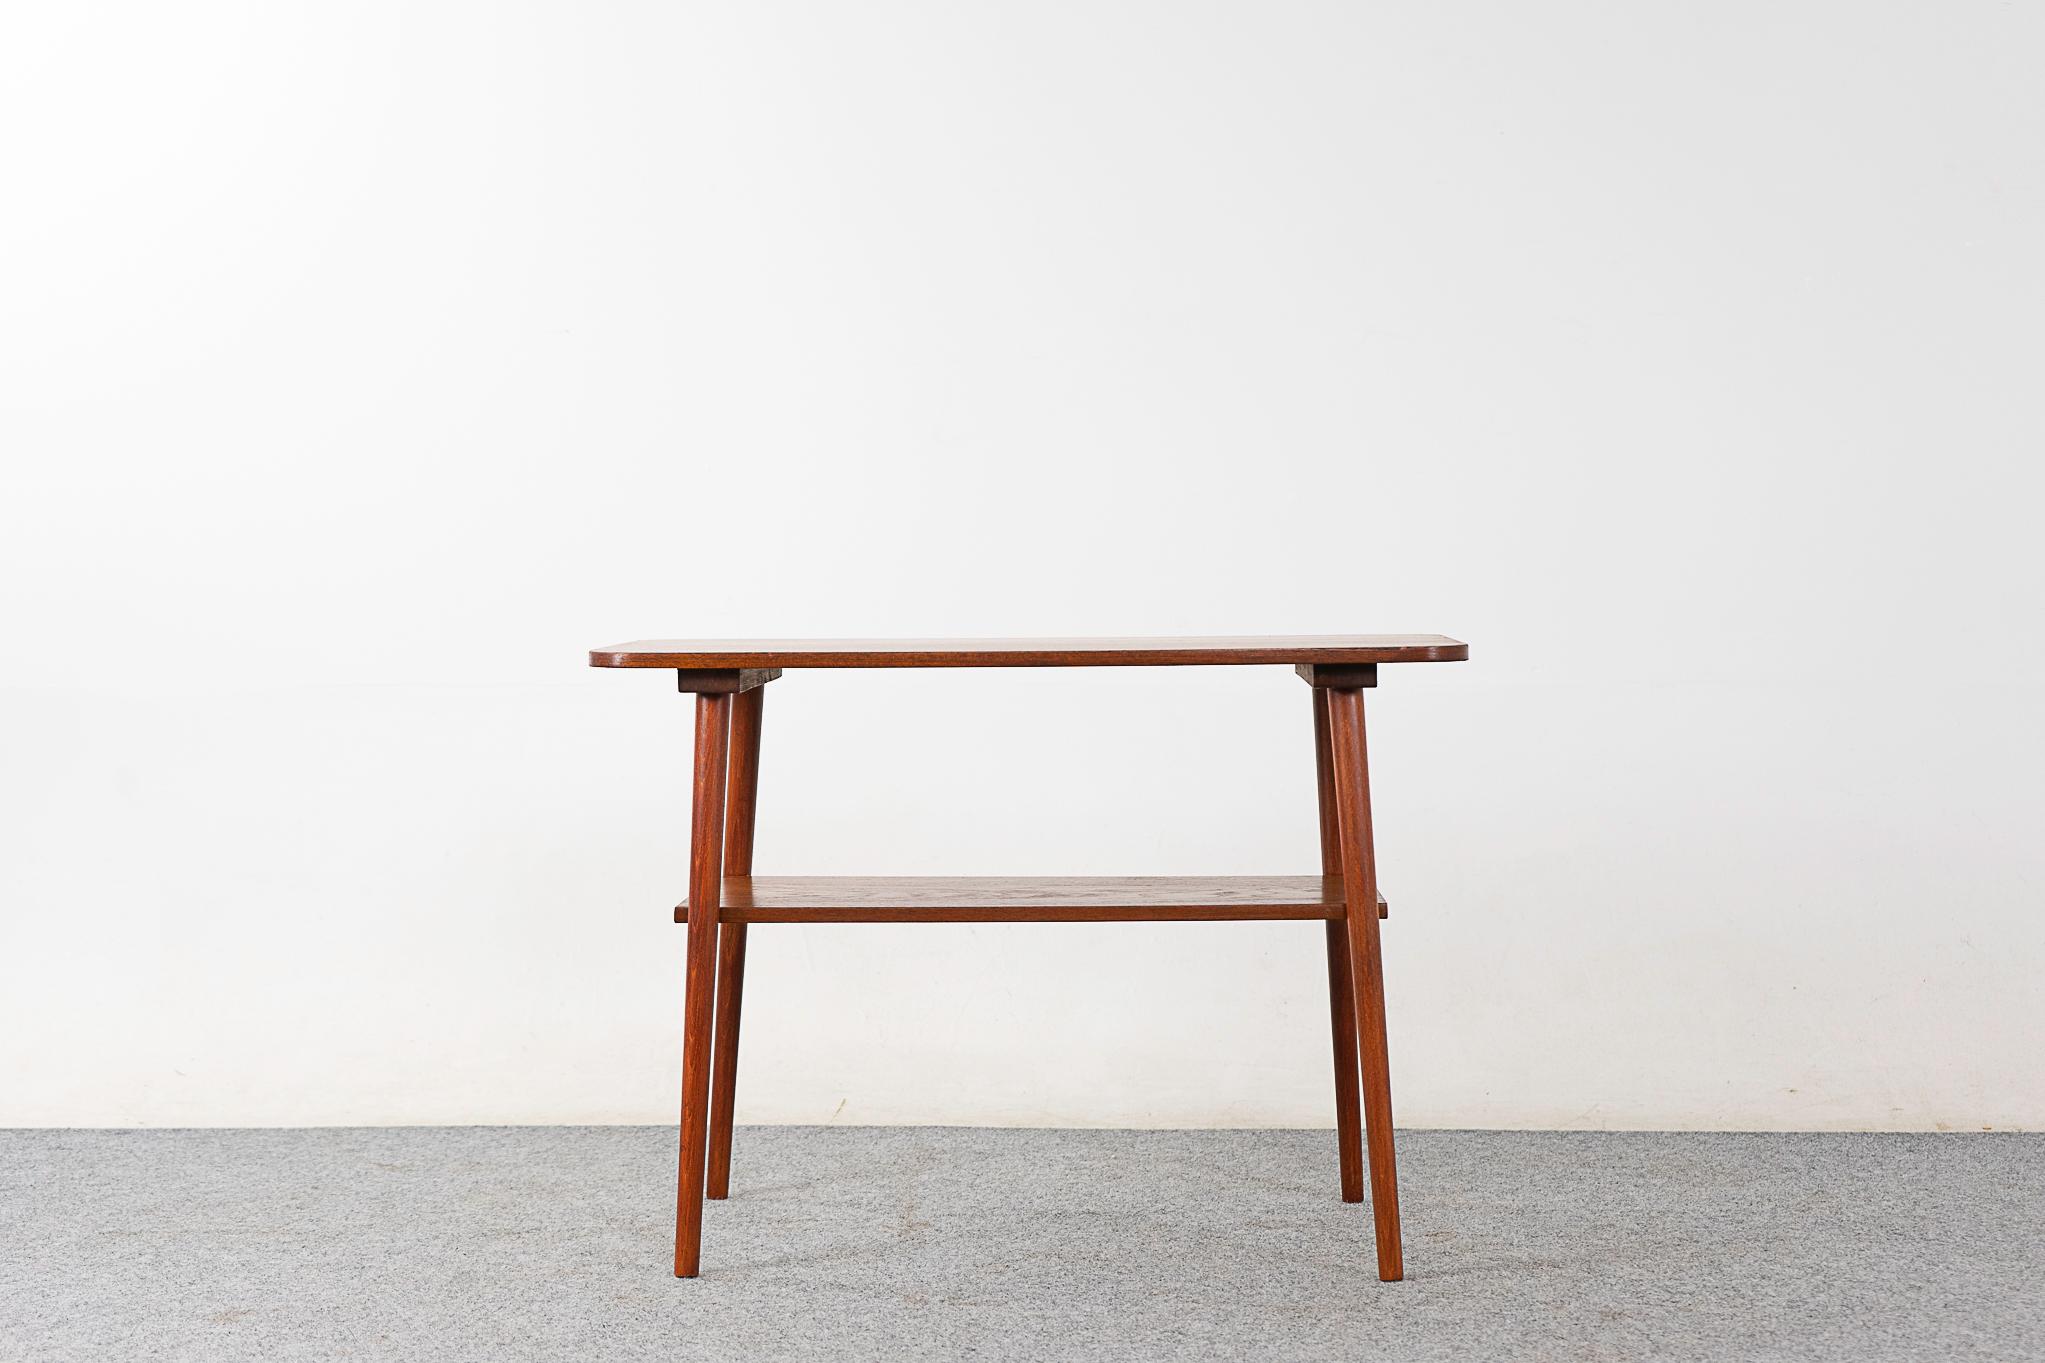 Teak Danish side table, circa 1960's.  Darling little table with solid teak construction on the base and handsome book-matched teak veneer on the top. Handy shelf too!

Please inquire for remote and international shipping rates.